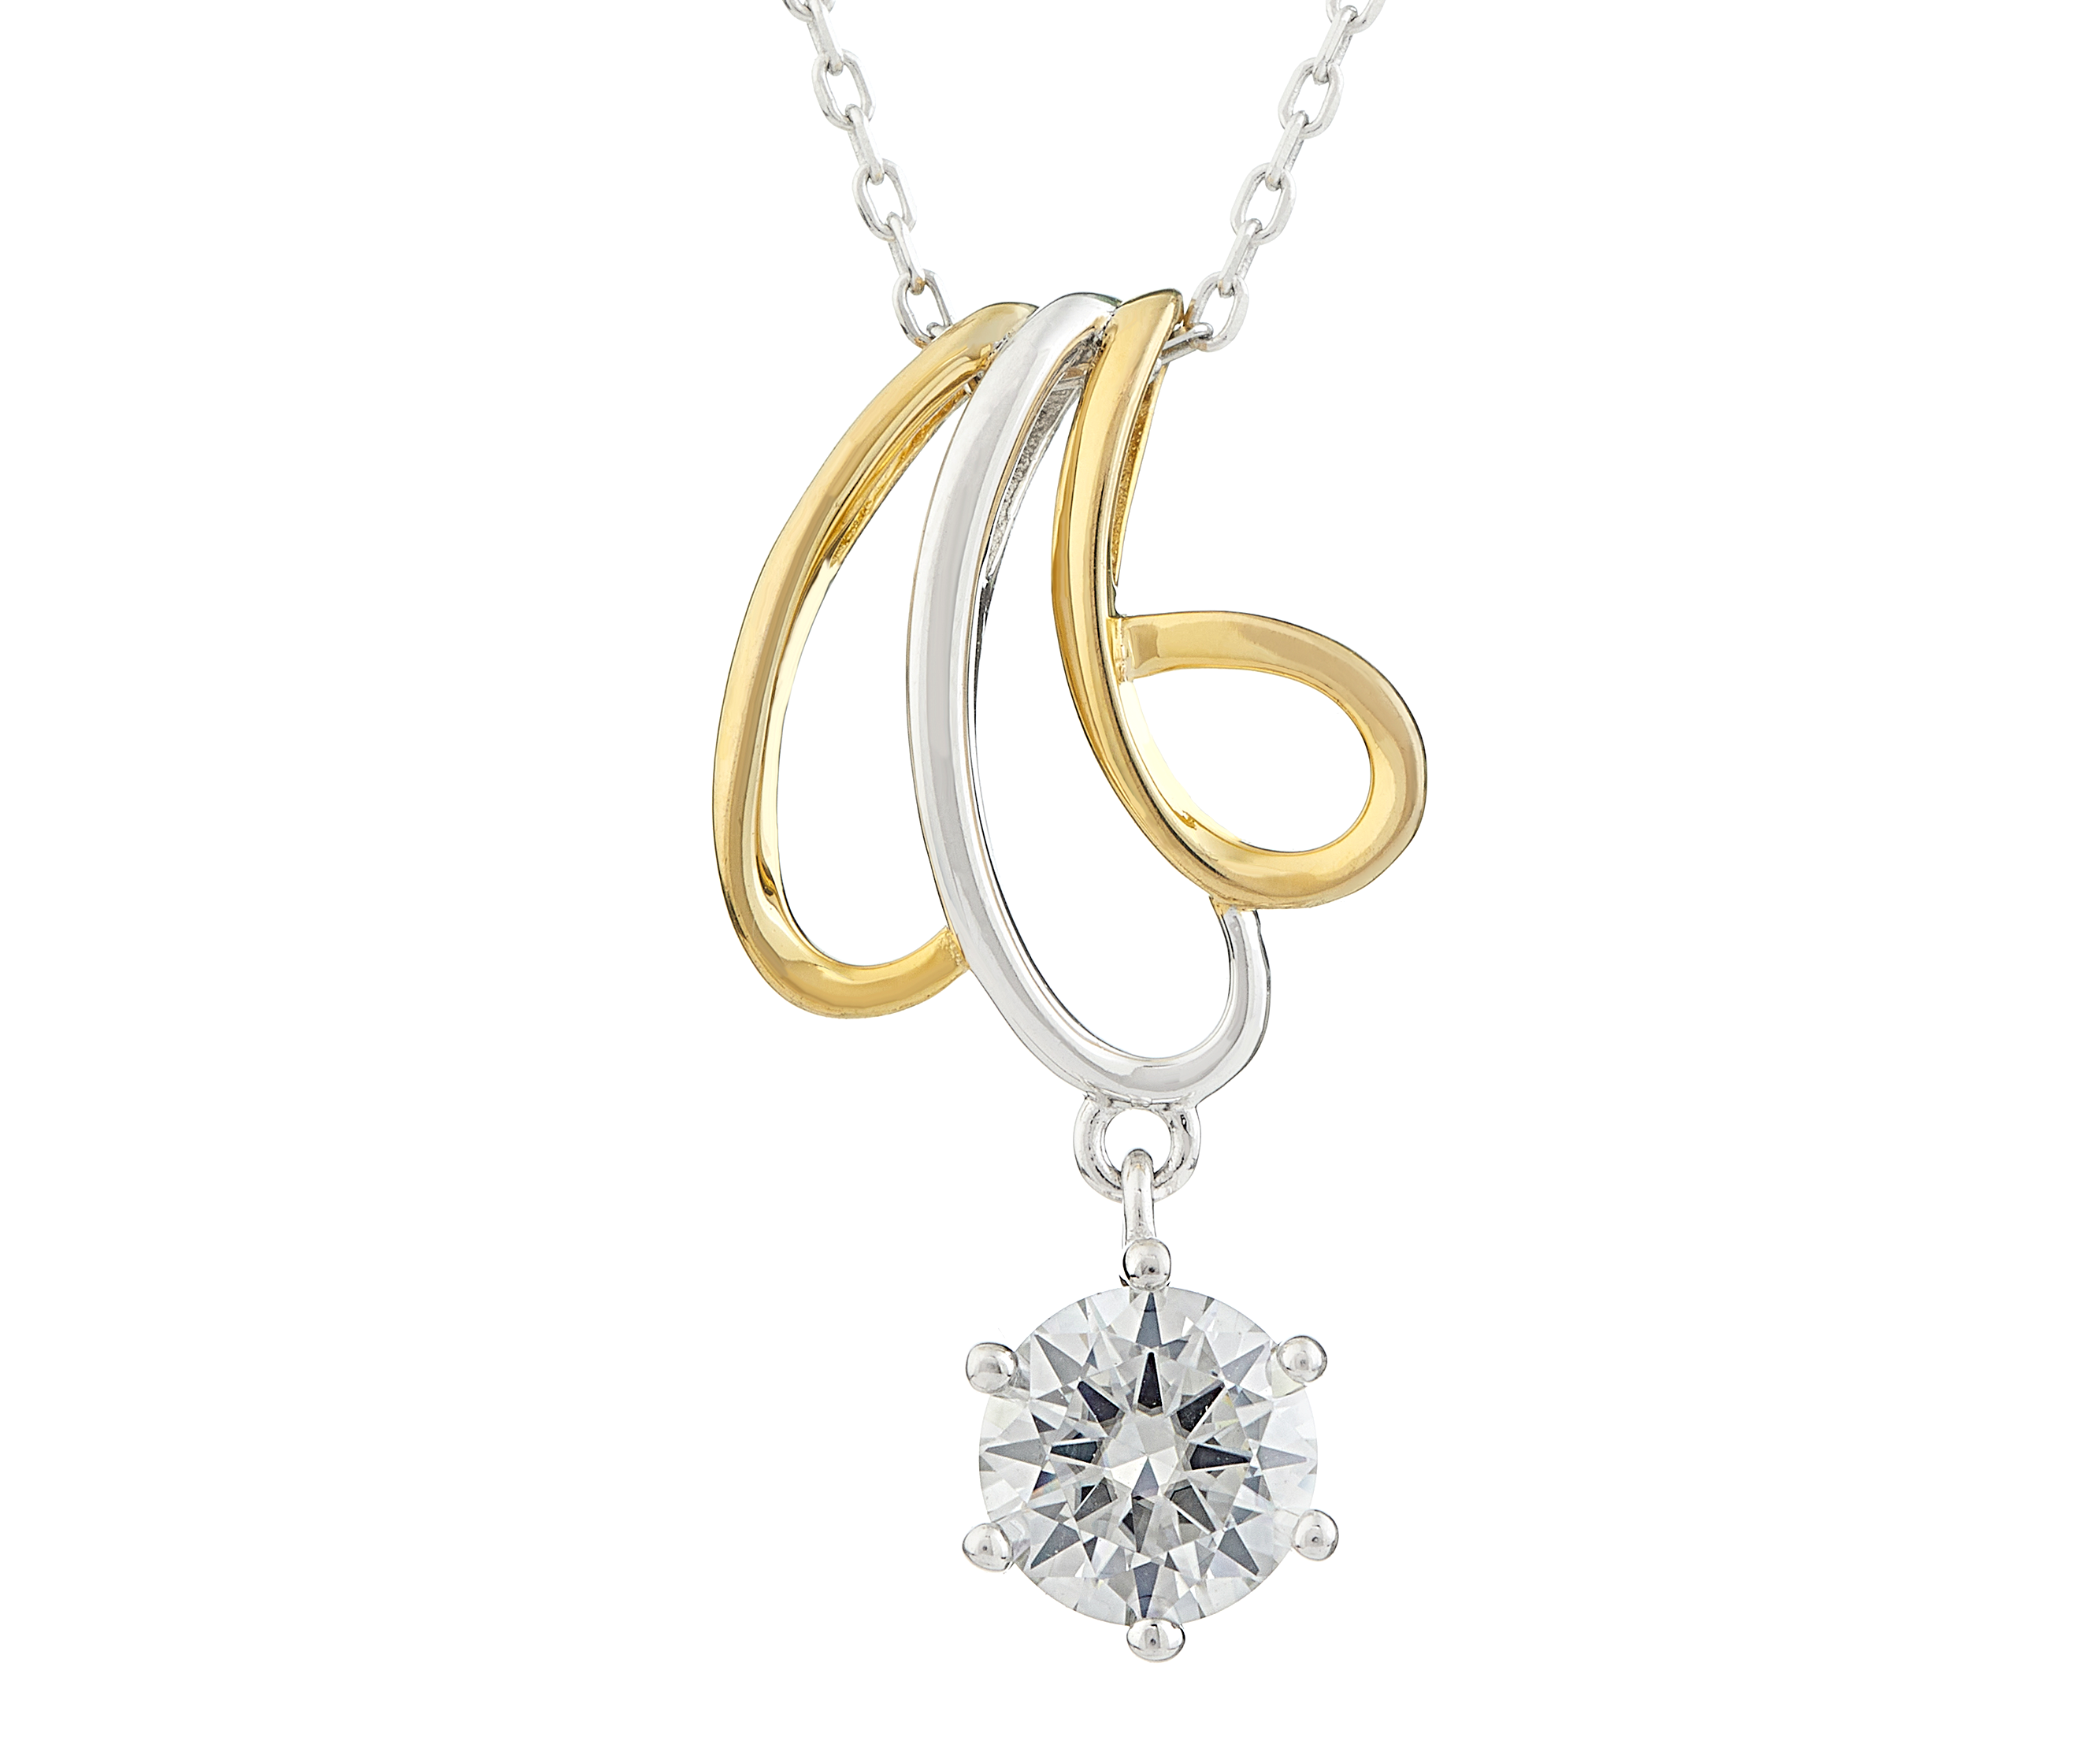 Heavenly Moissanite Studded Pendant with Sterling Silver Chain 